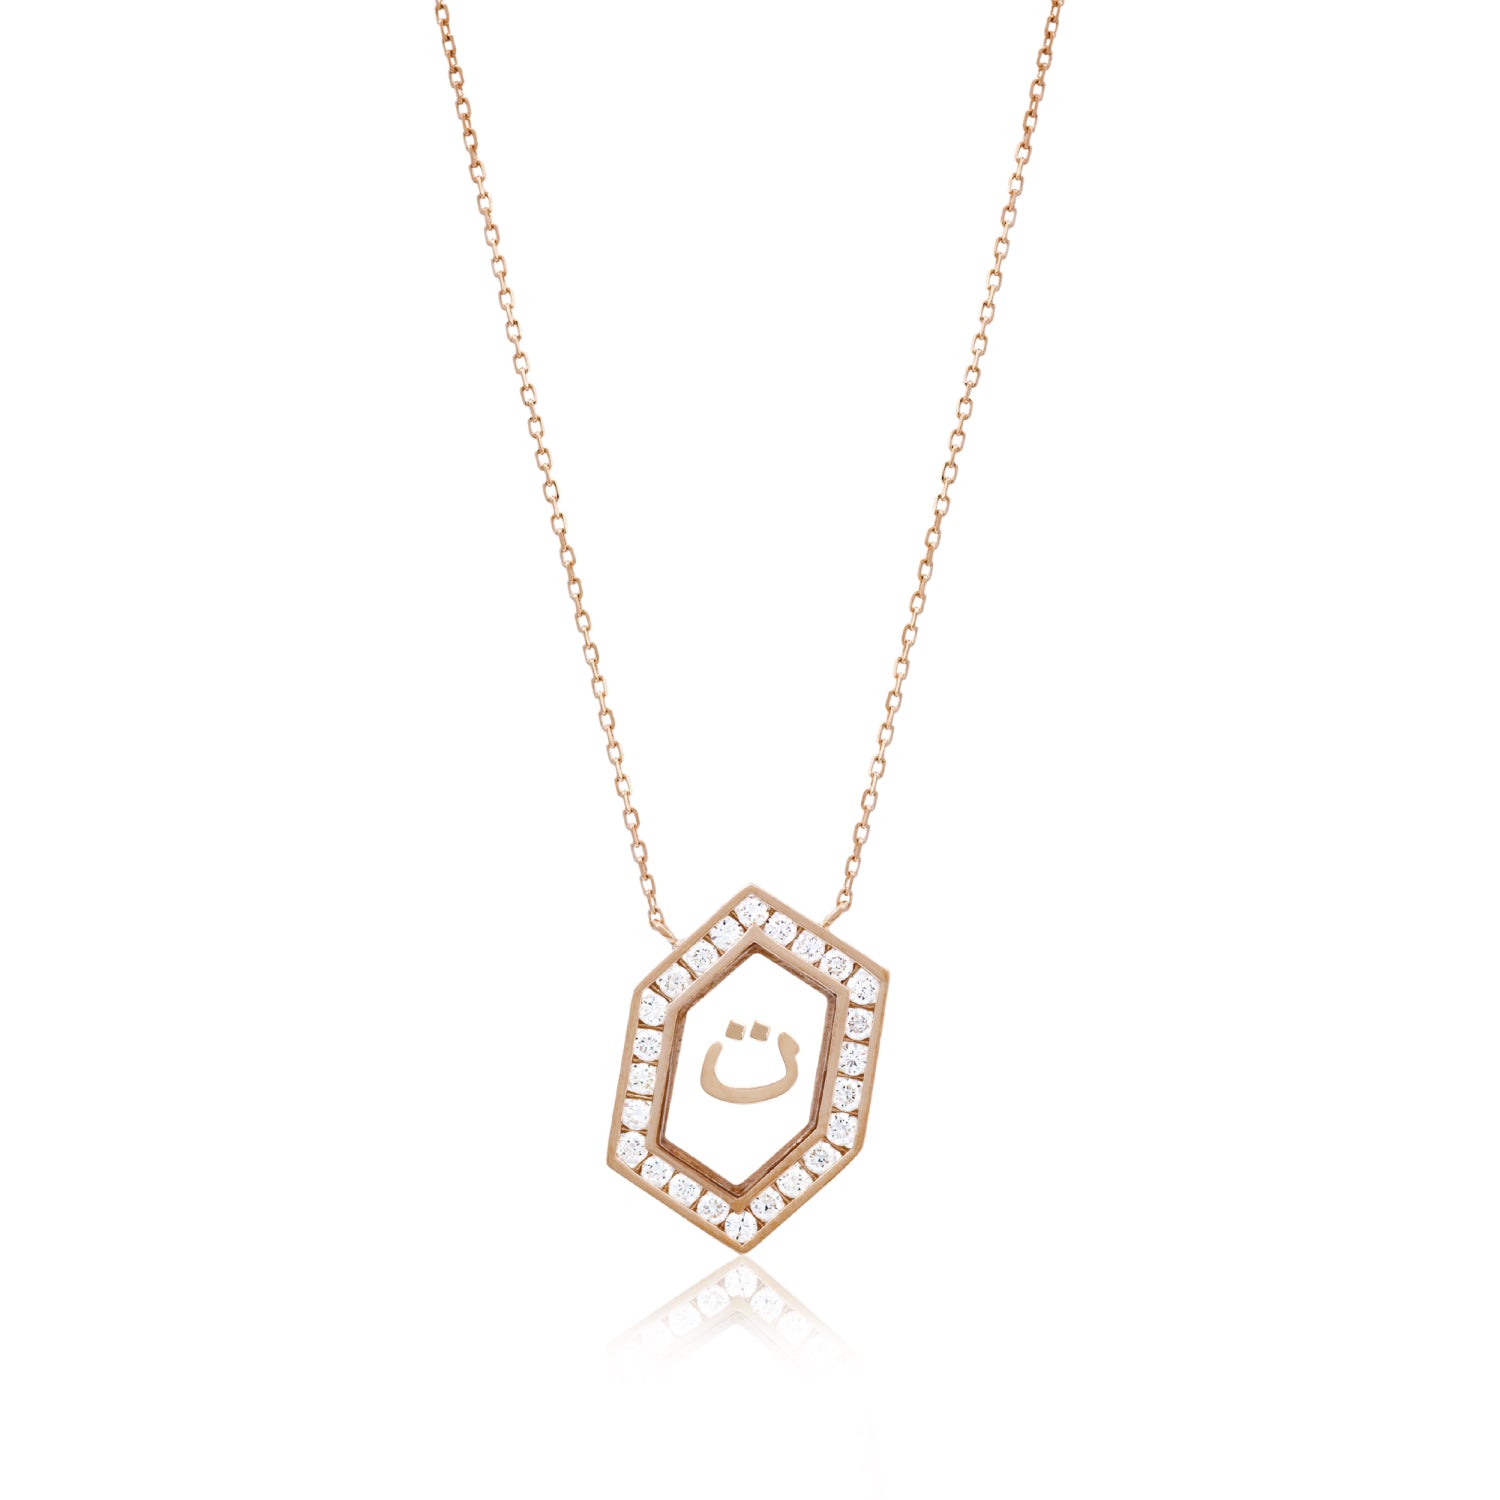 Qamoos 1.0 Letter ت Diamond Necklace in Rose Gold